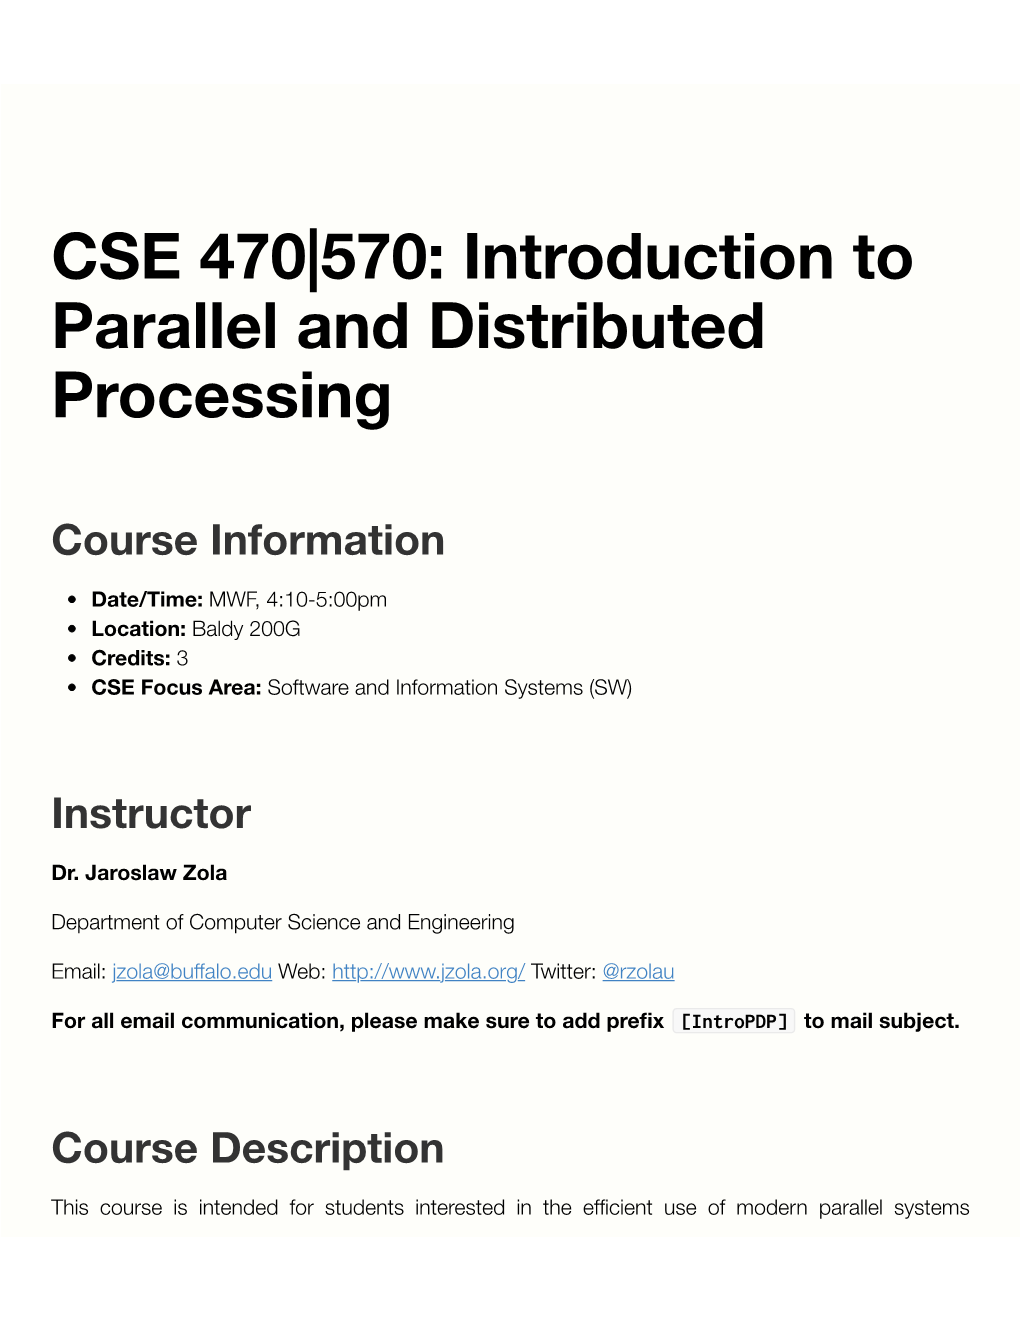 CSE 470|570: Introduction to Parallel and Distributed Processing